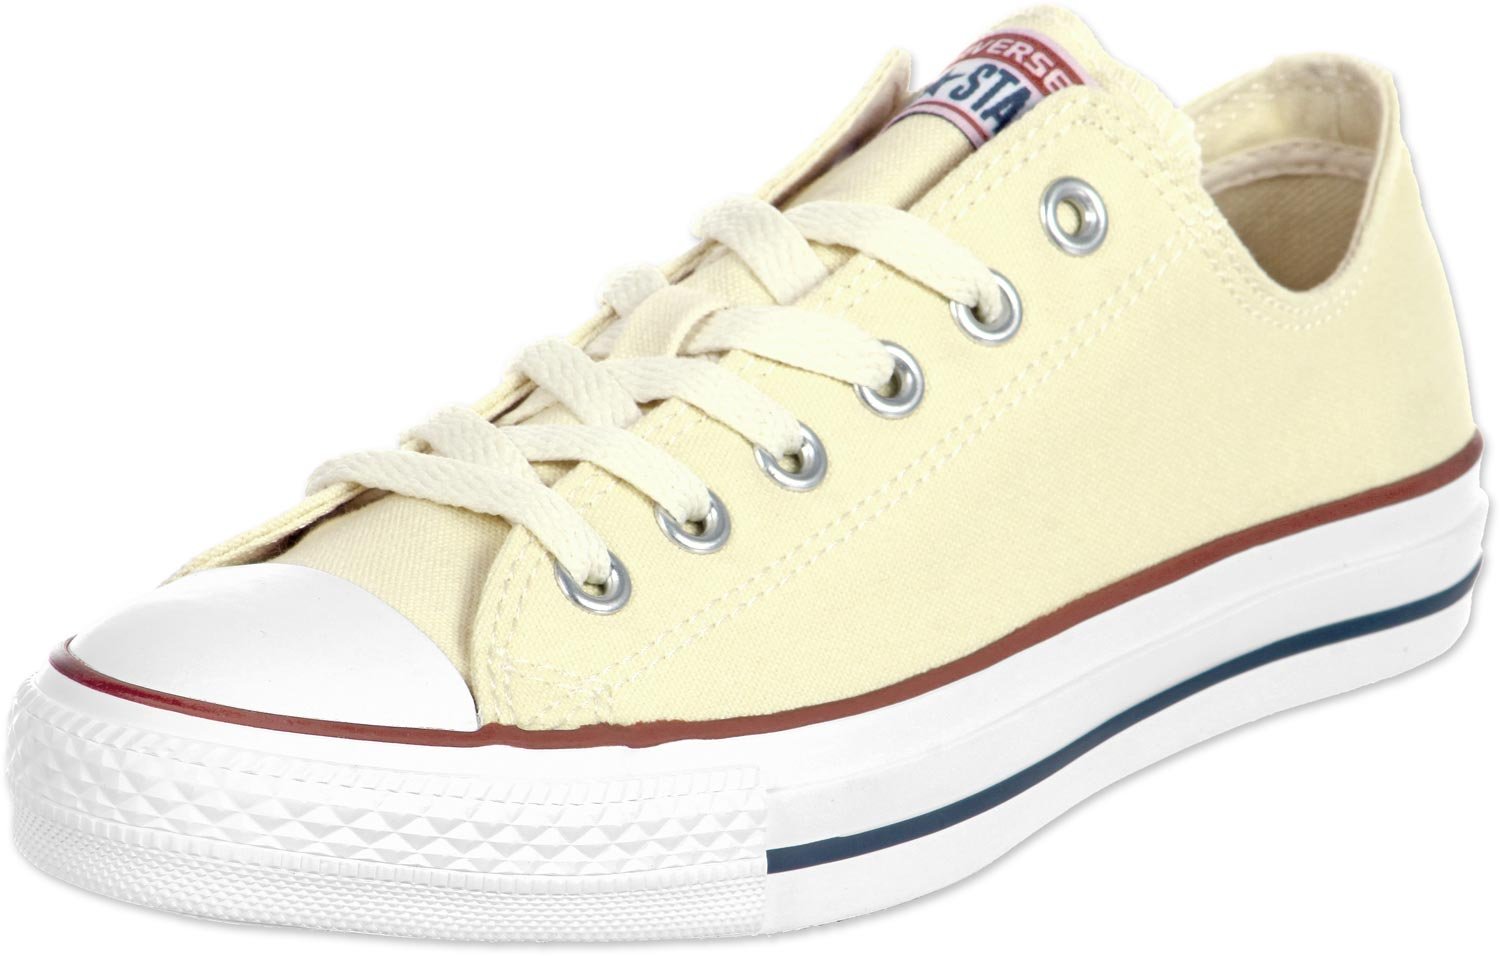 Converse Unisex Chuck Taylor All Star Low Top Natural White Sneakers - 13.5 B(M) US Women / 11.5 D(M) US Men